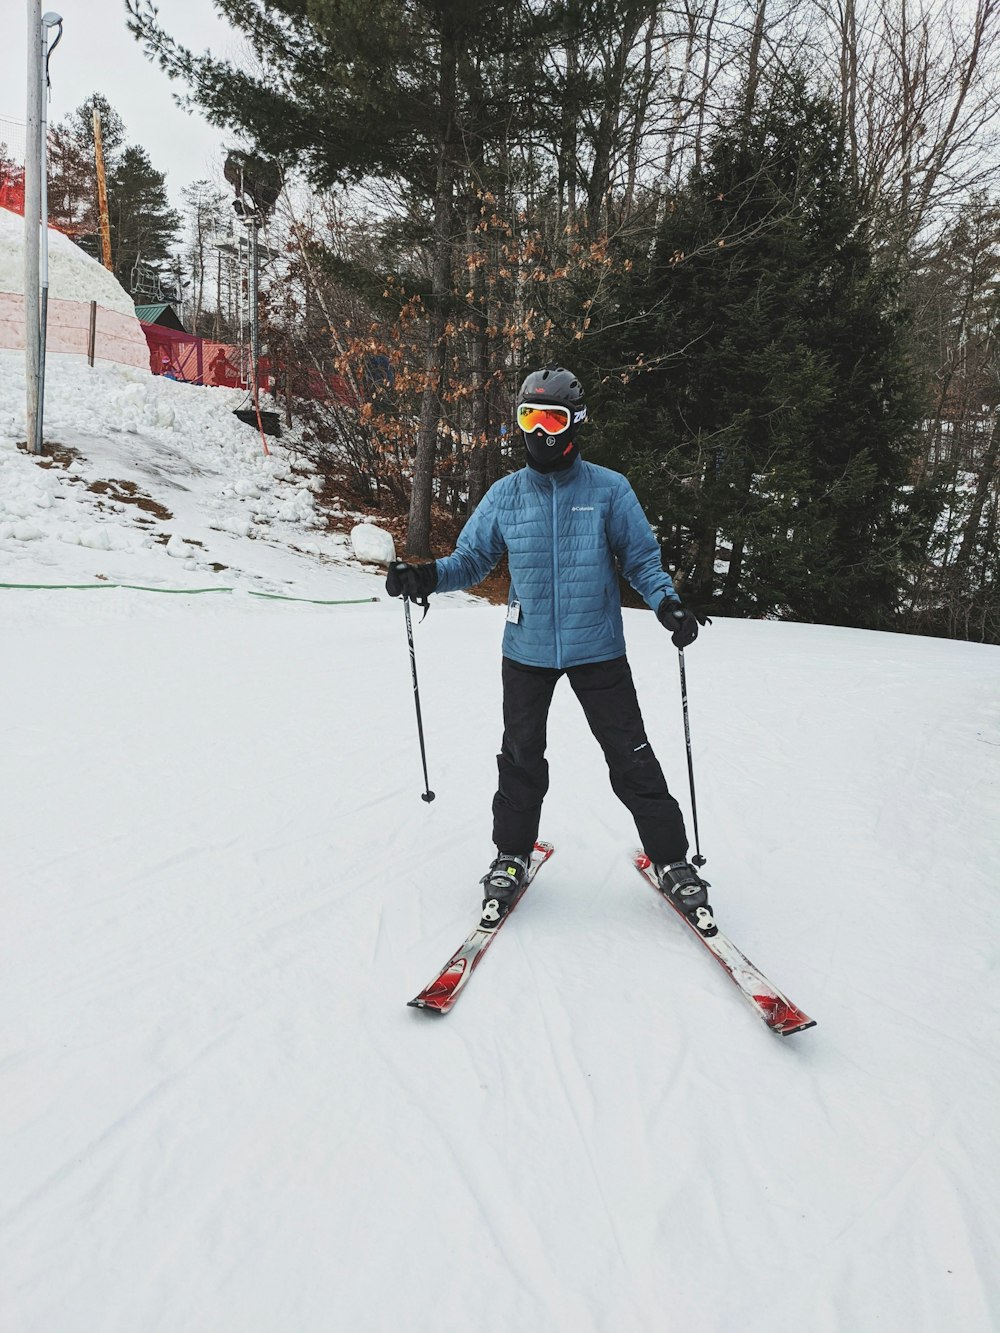 man in blue jacket and blue helmet riding on red ski blades on snow covered ground